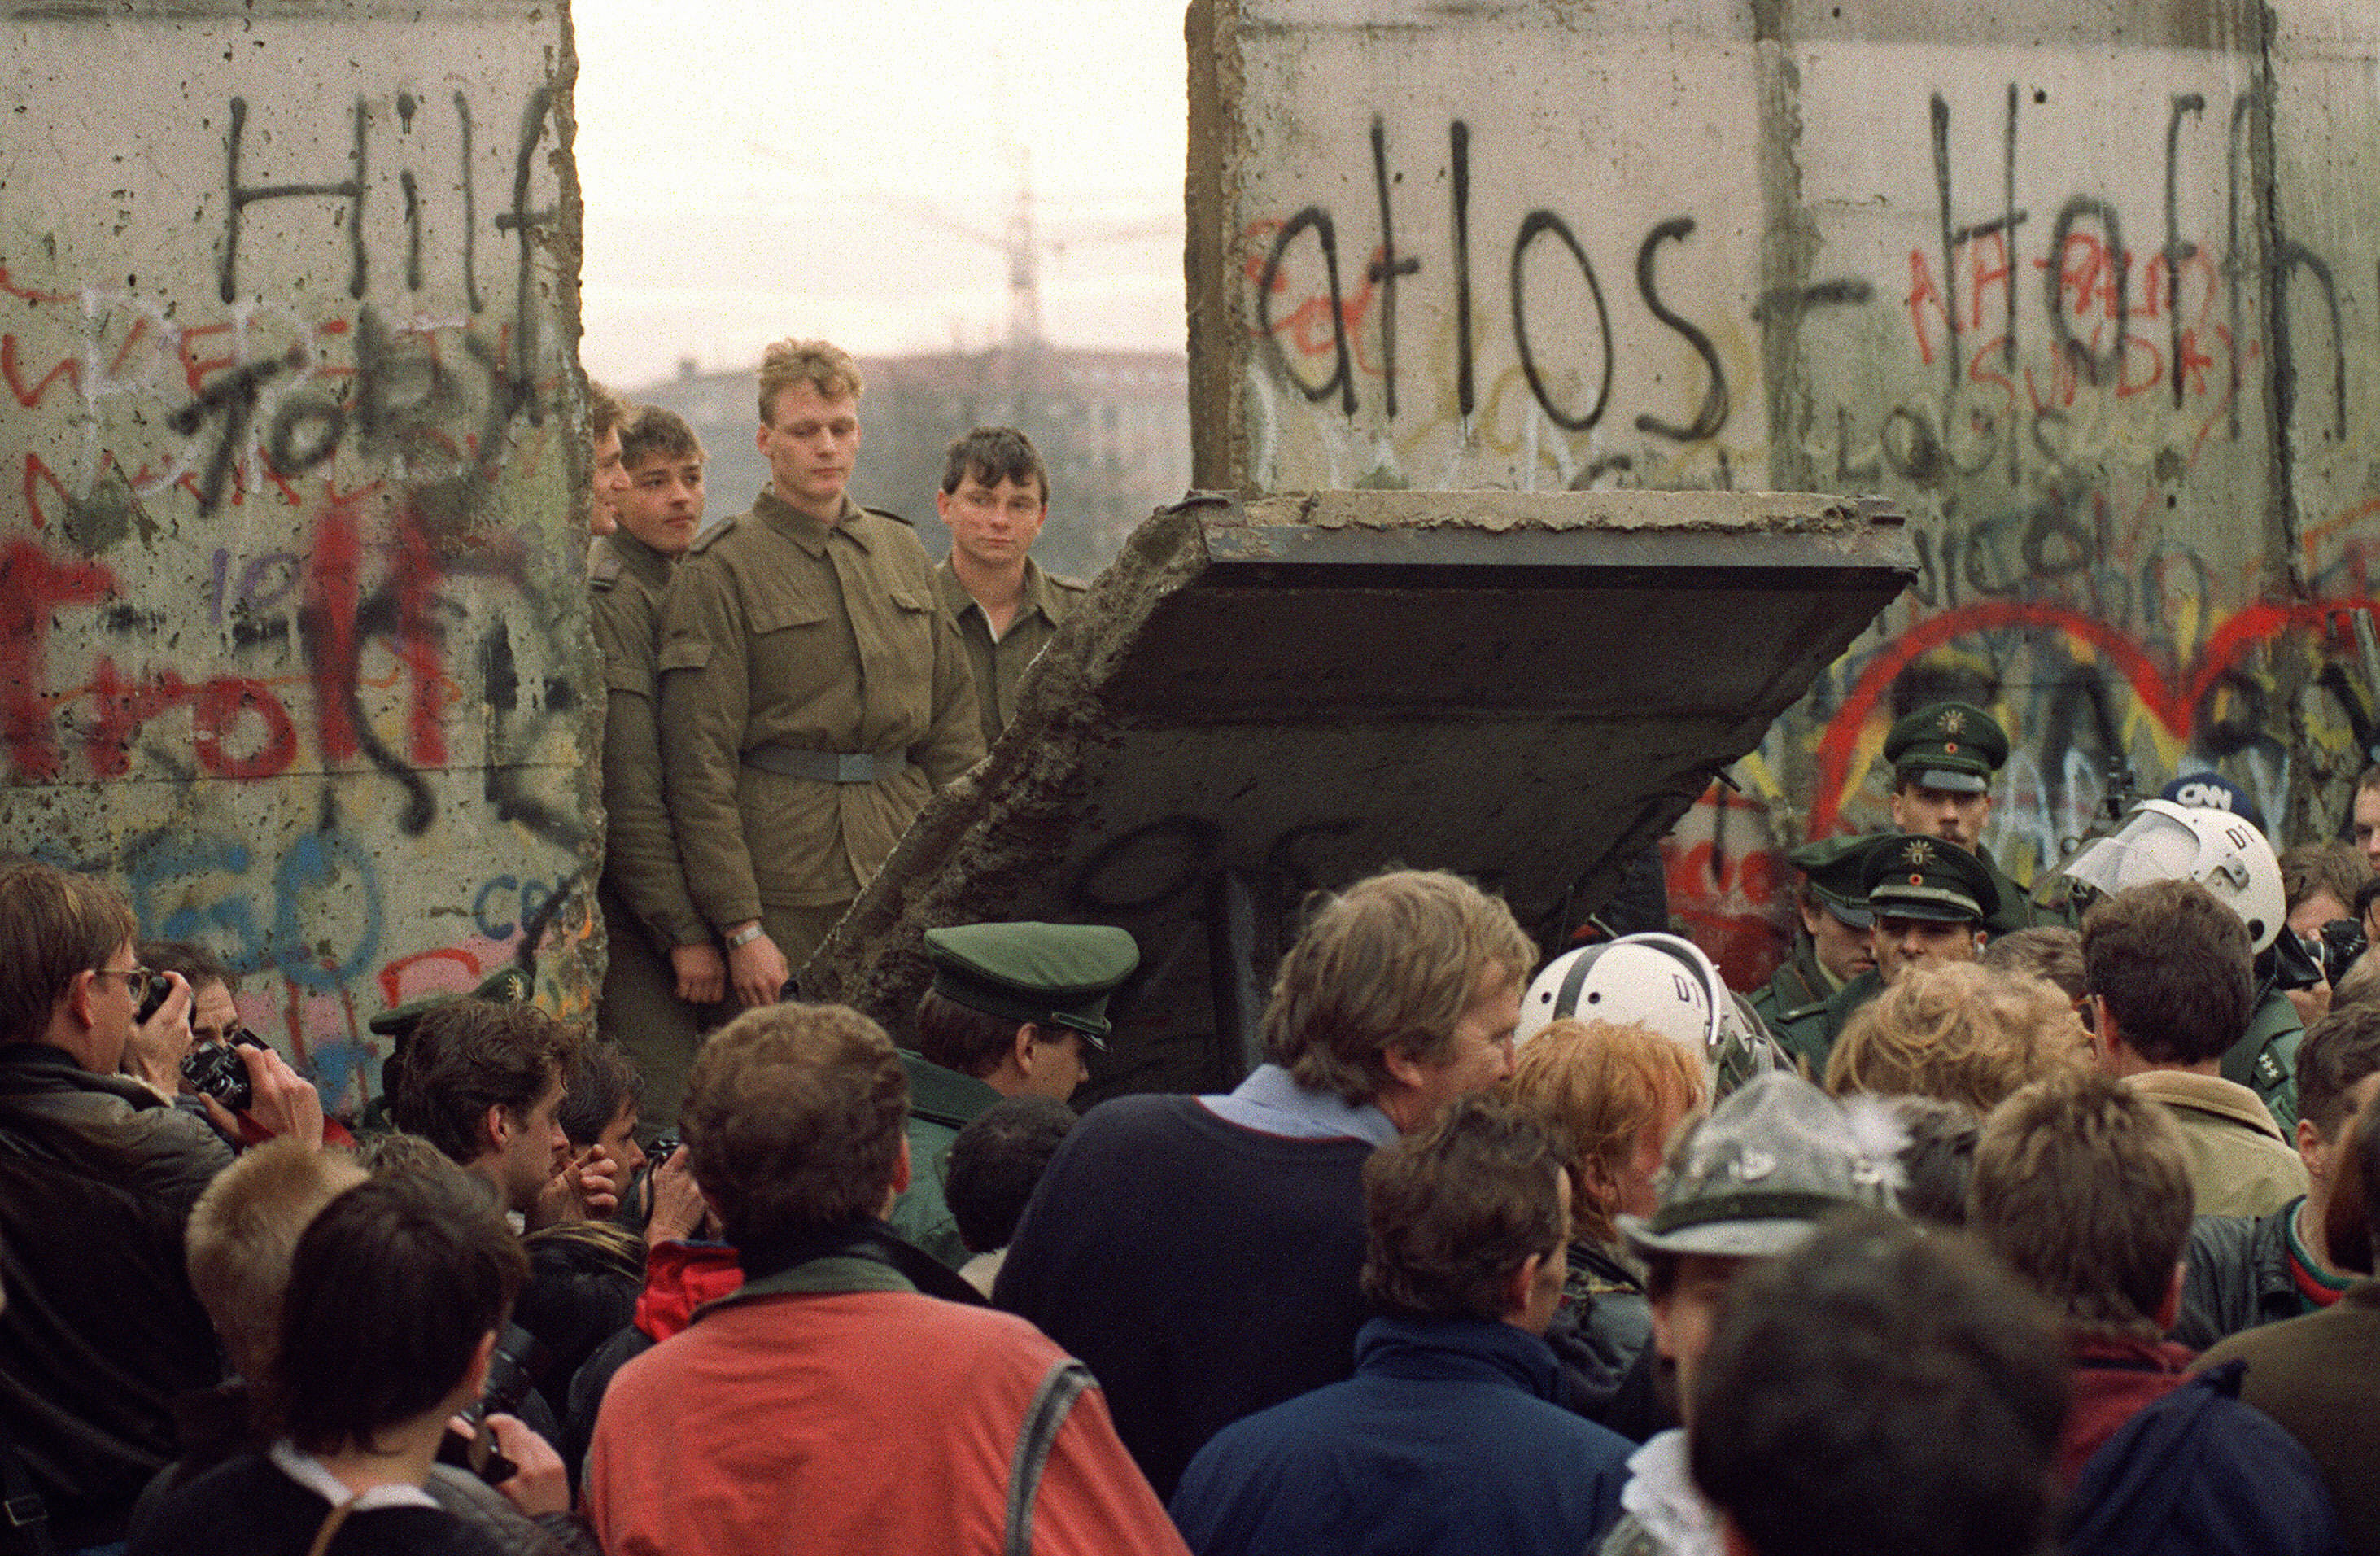 A crowd in front of the Berlin Wall on Nov. 11, 1989 watches border guards demolish a section of the wall in order to open a new crossing point between East and West Berlin in Germany. (AFP—AFP/Getty Images)